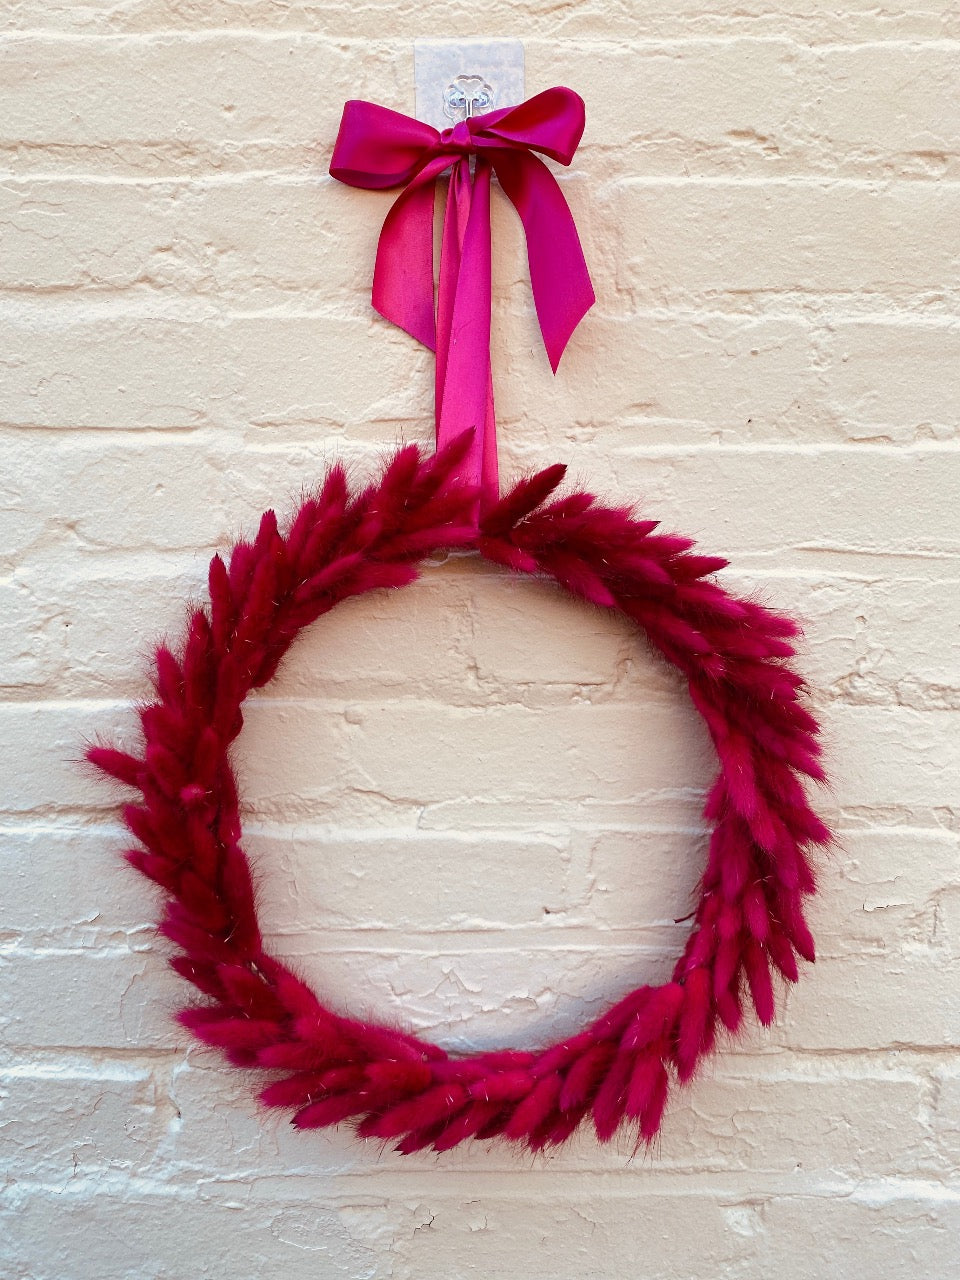 Hot Pink Bunny Tail Wreath, finished with matched satin bow